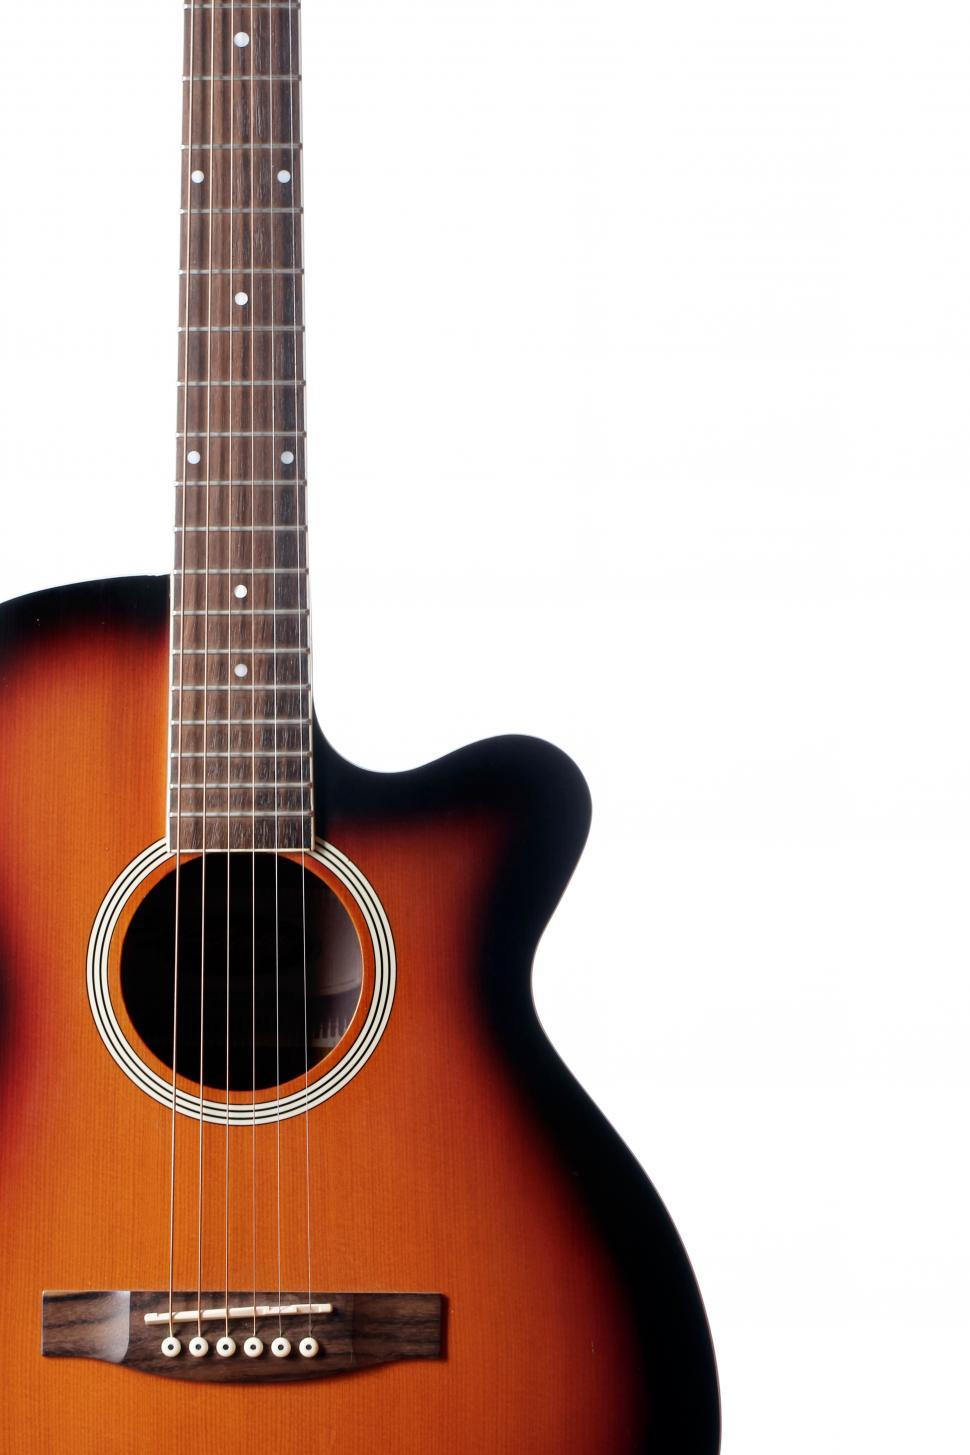 Free Image of Classic acoustic guitar on white background 